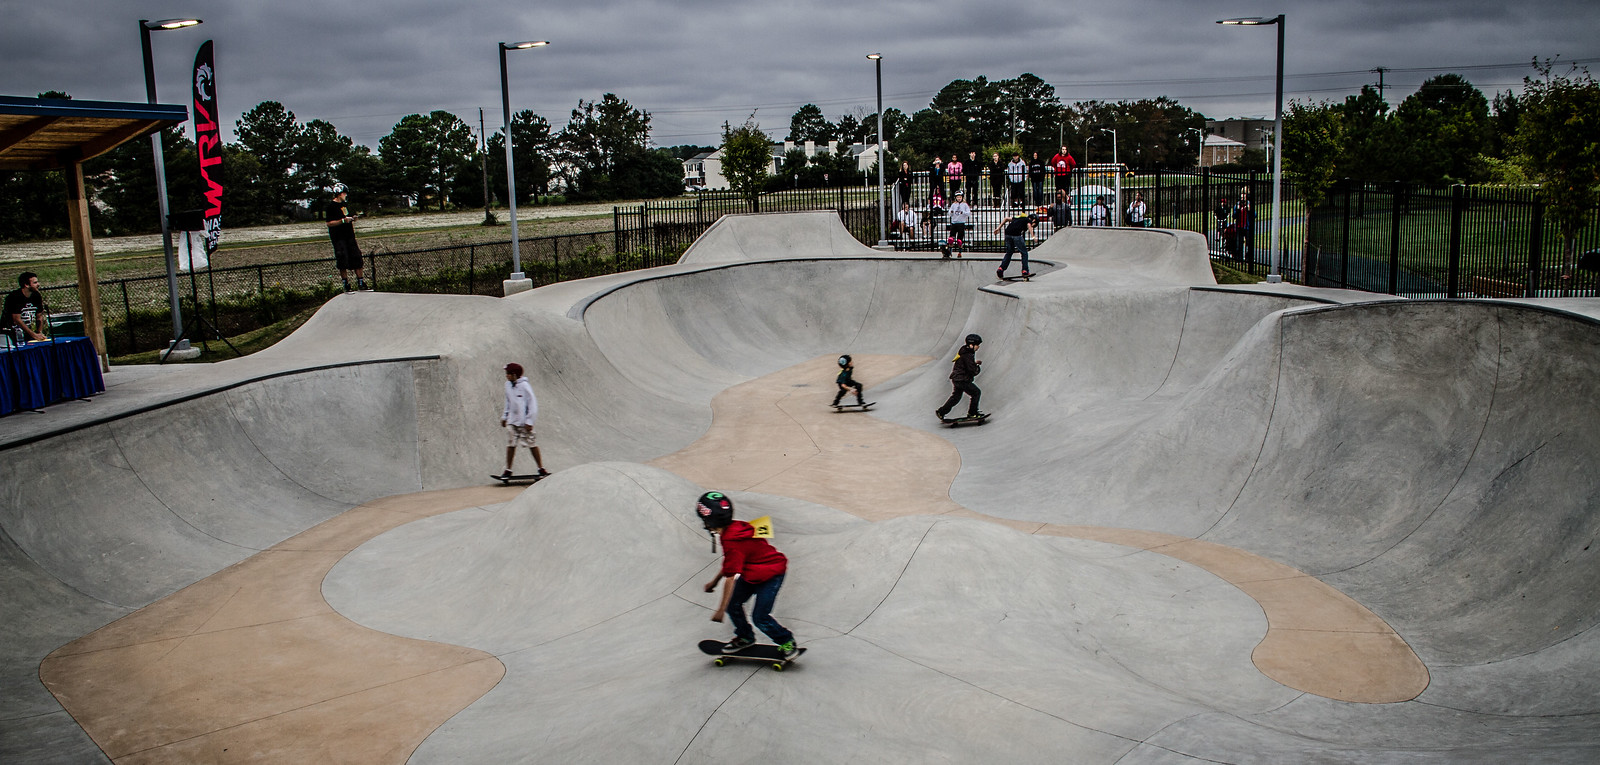 2013 Sk8r Bash At Williams Farm Park Photo By Anthony Sola Flickr